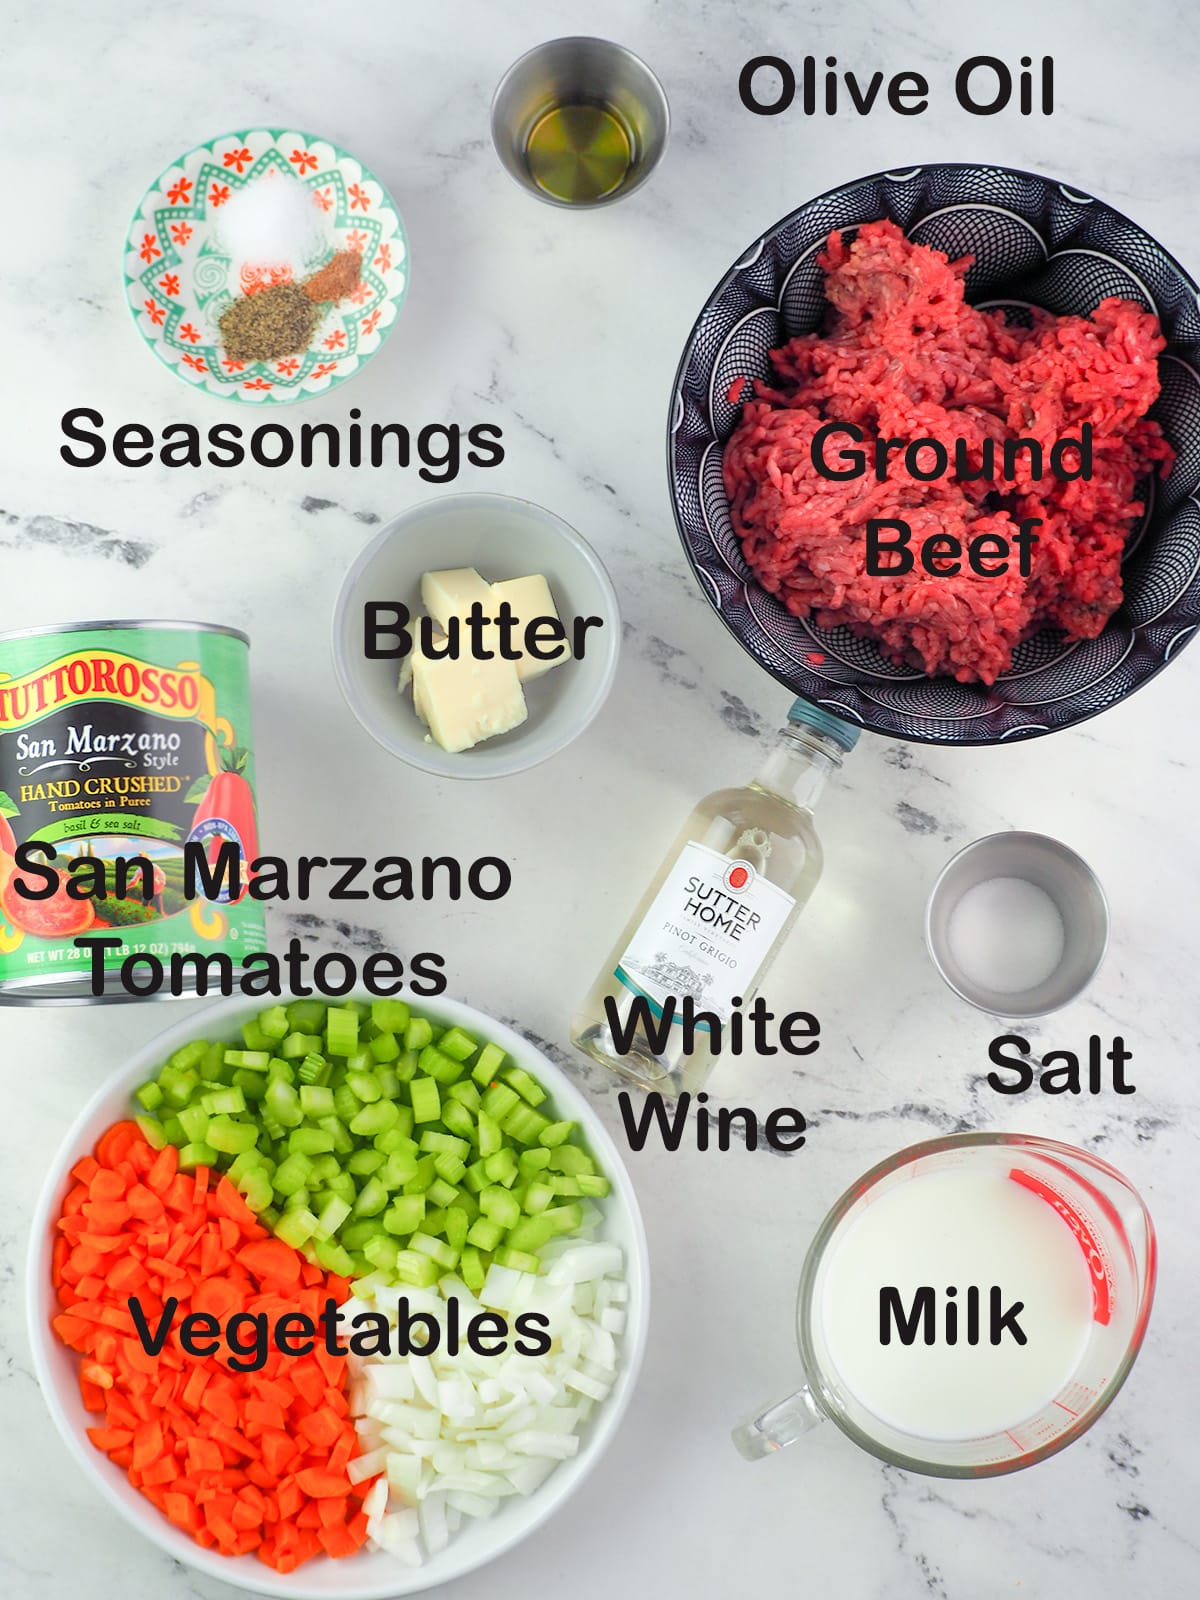 ingredients for bolognese sauce